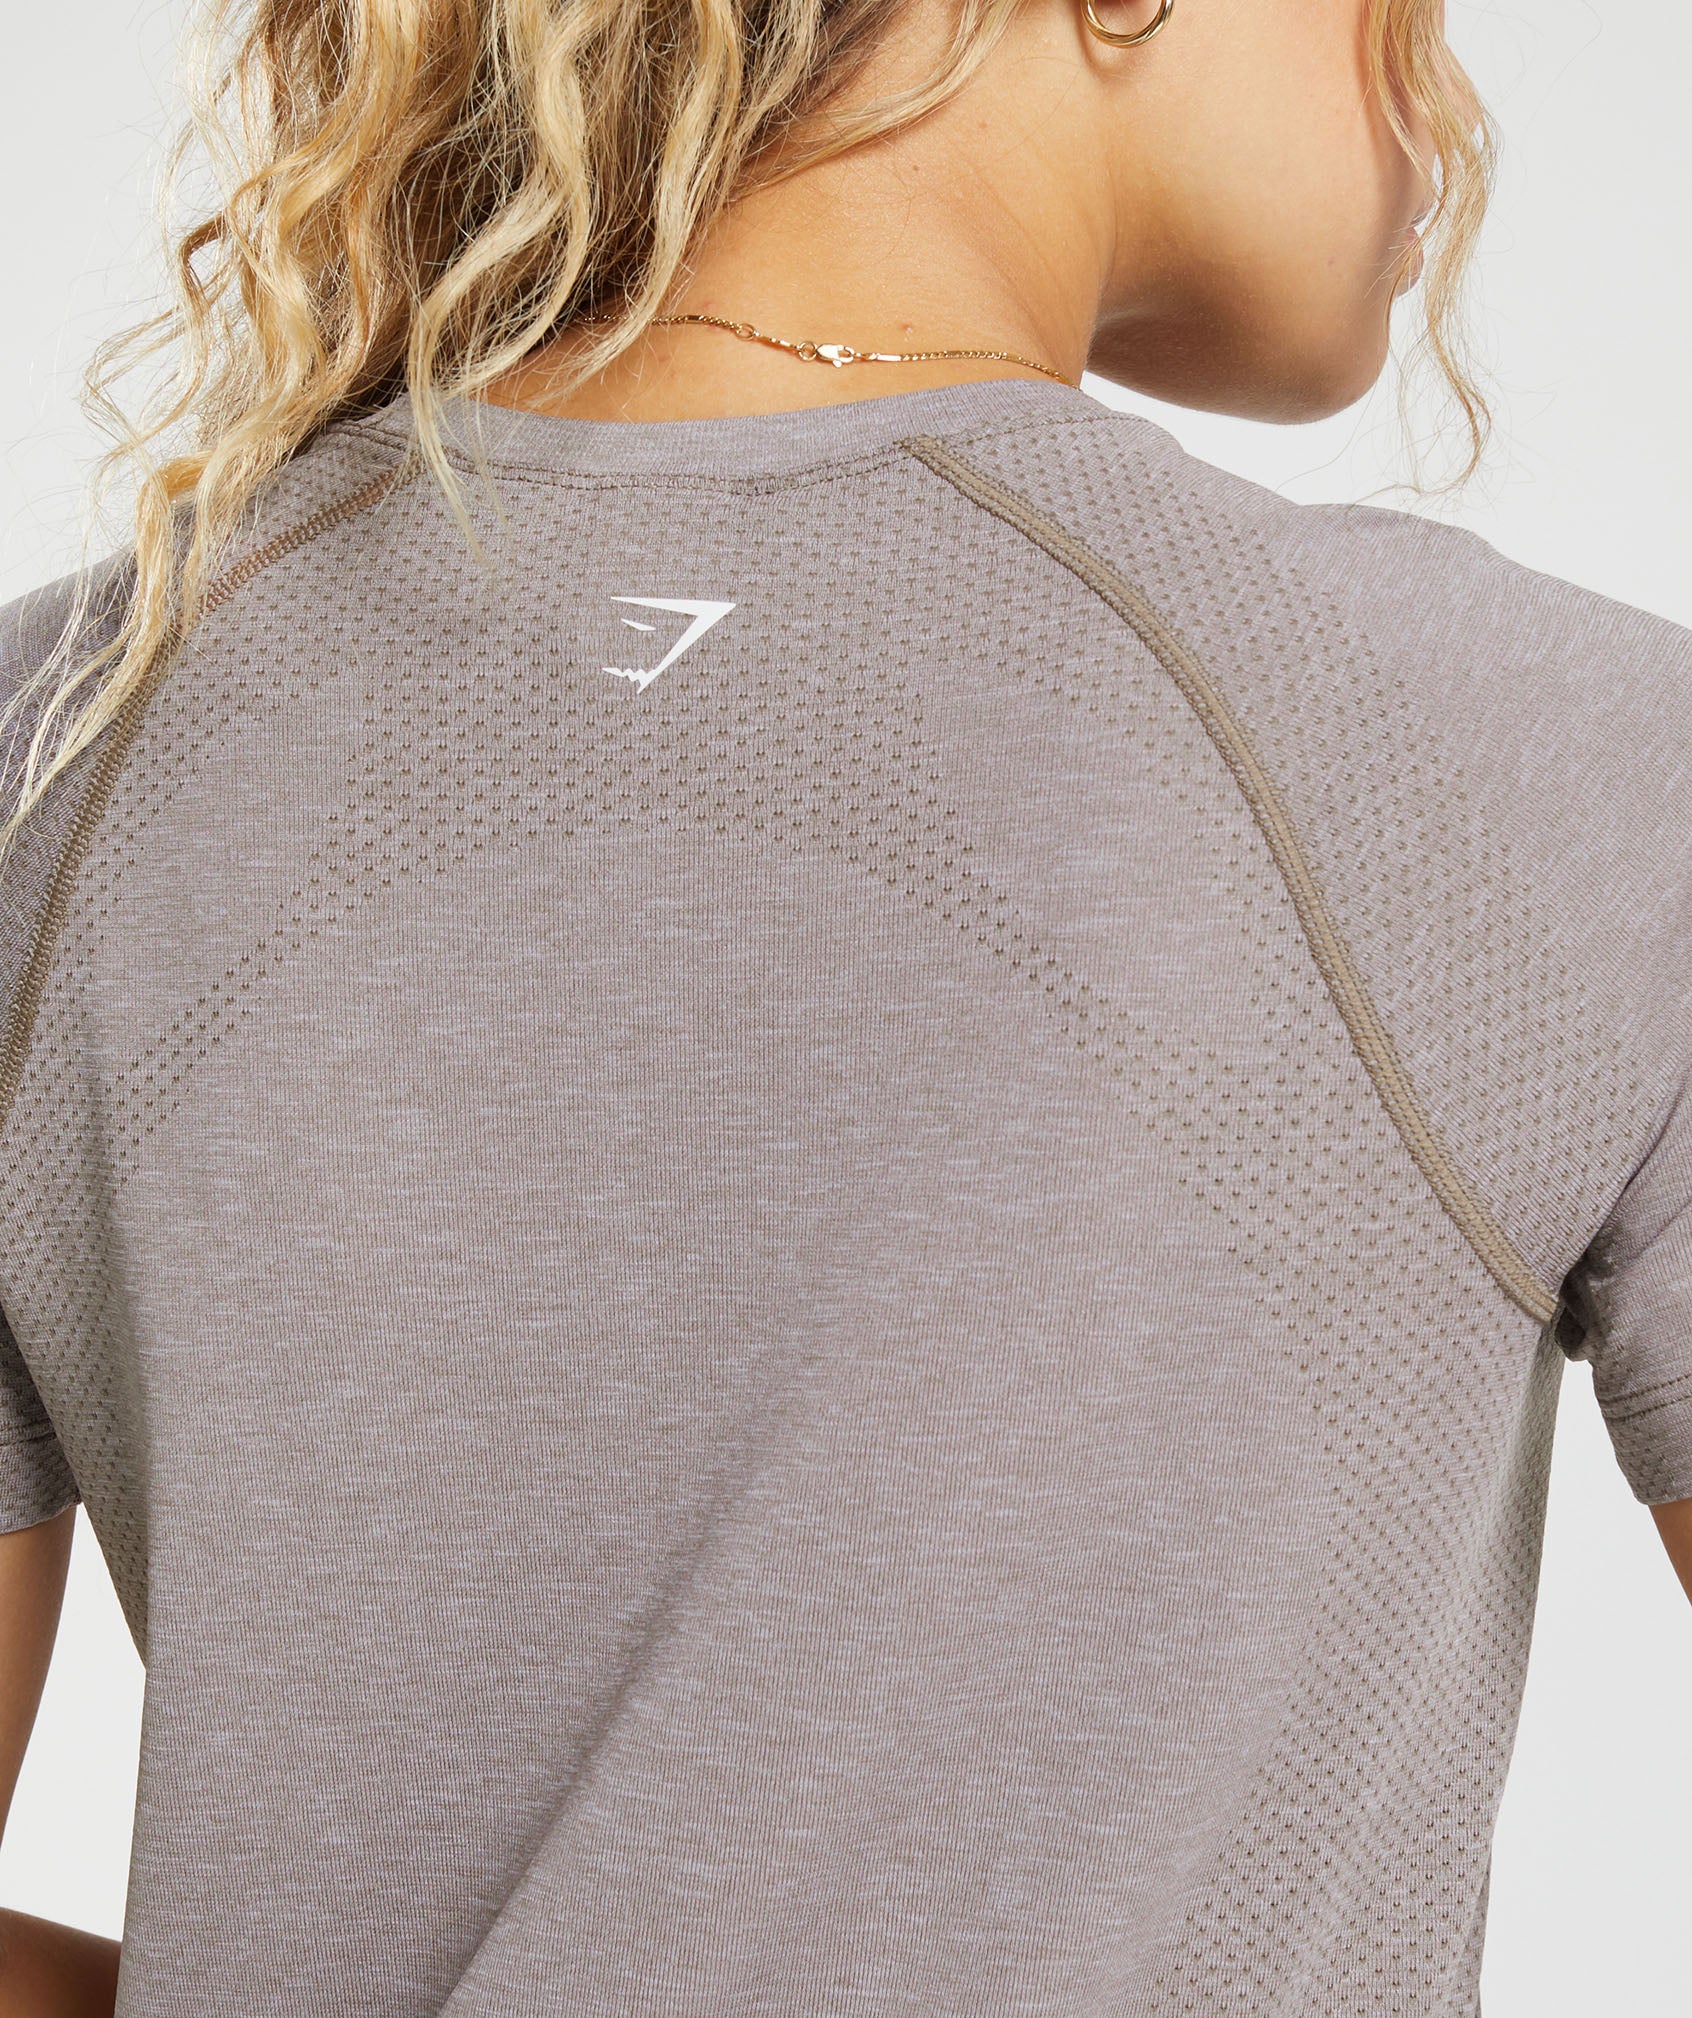 Vital Seamless 2.0 Light T-Shirt in Warm Taupe Marl - view 6